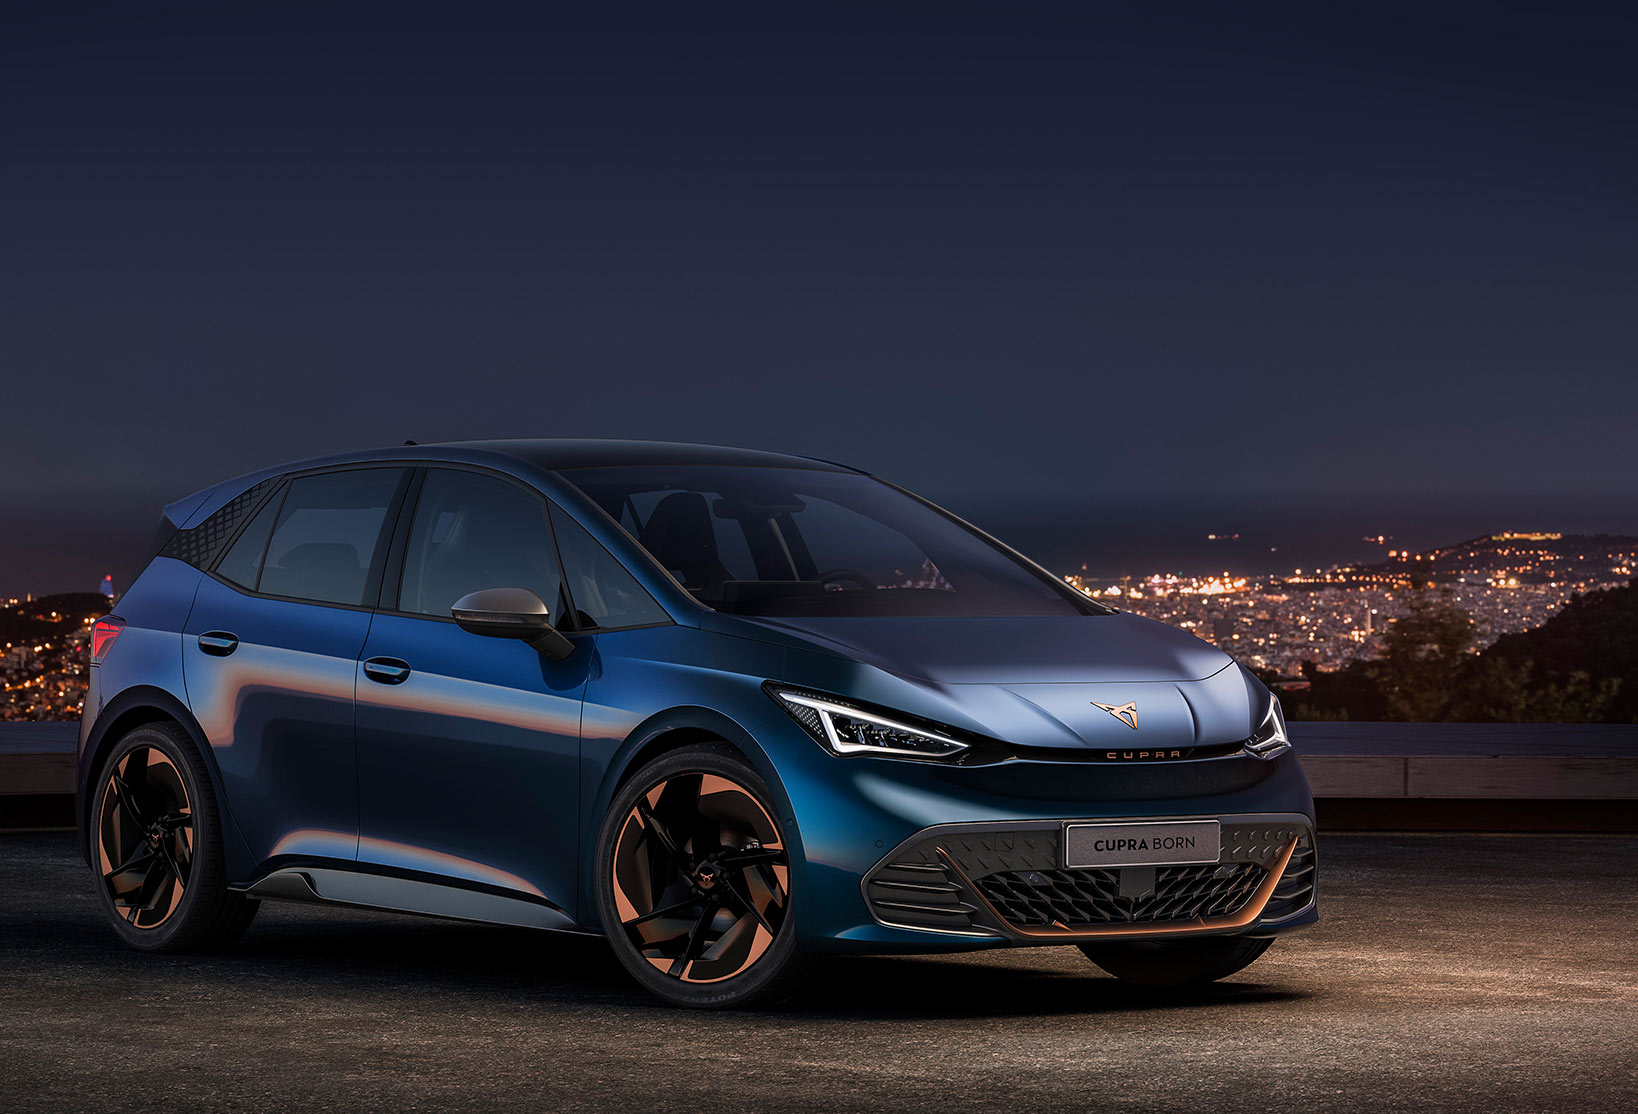 CUPRA Born model as the first electric vehicle of the brand.